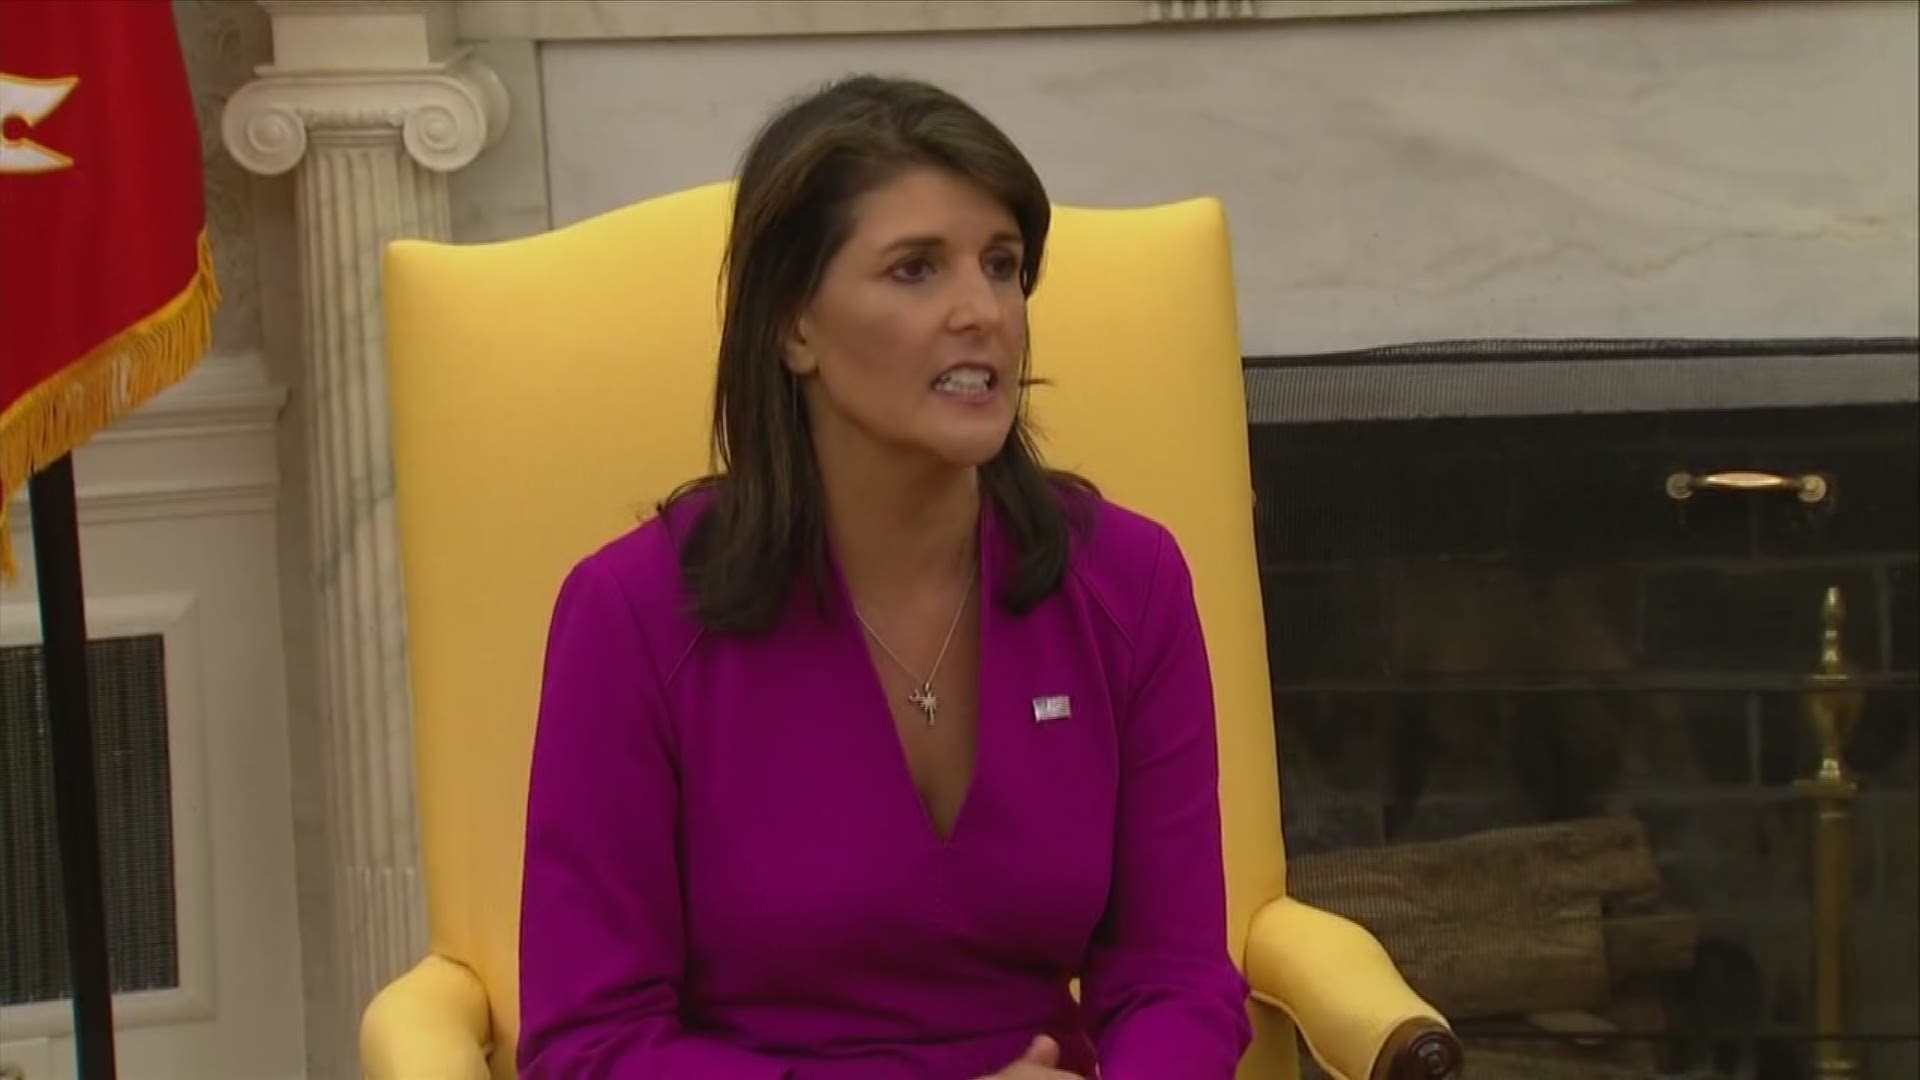 While announcing her plans Tuesday morning to resign from the UN Ambassador post, Nikki Haley hailed the Trump family for their influence on American foreign policy.